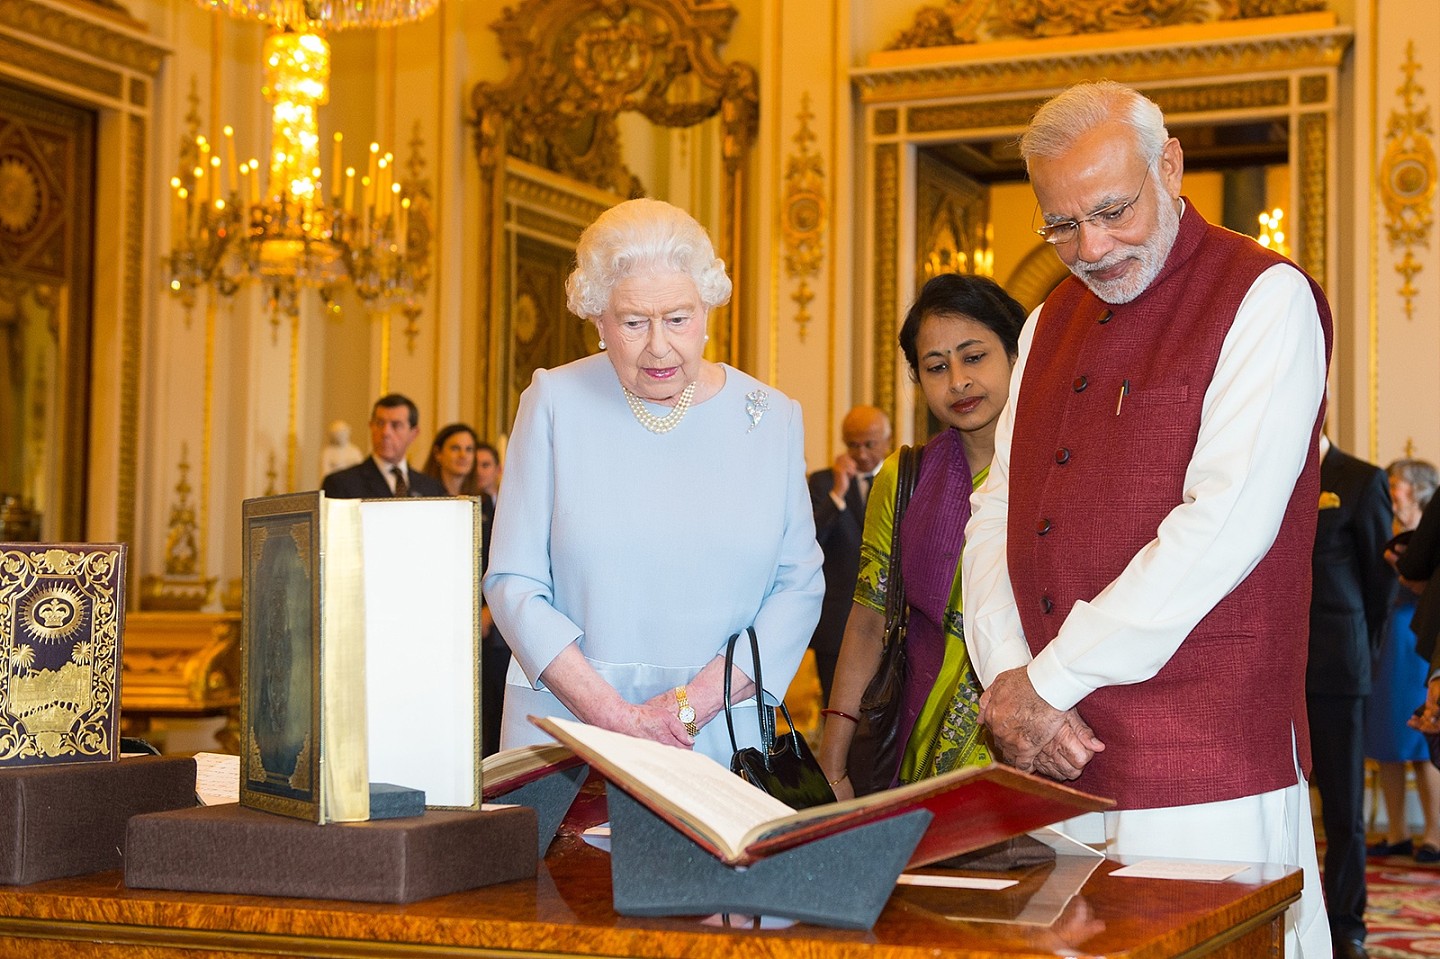 Queen Elizabeth II and Indian Prime Minister Narendra Modi at Buckingham Palace in London on November 13, 2015.